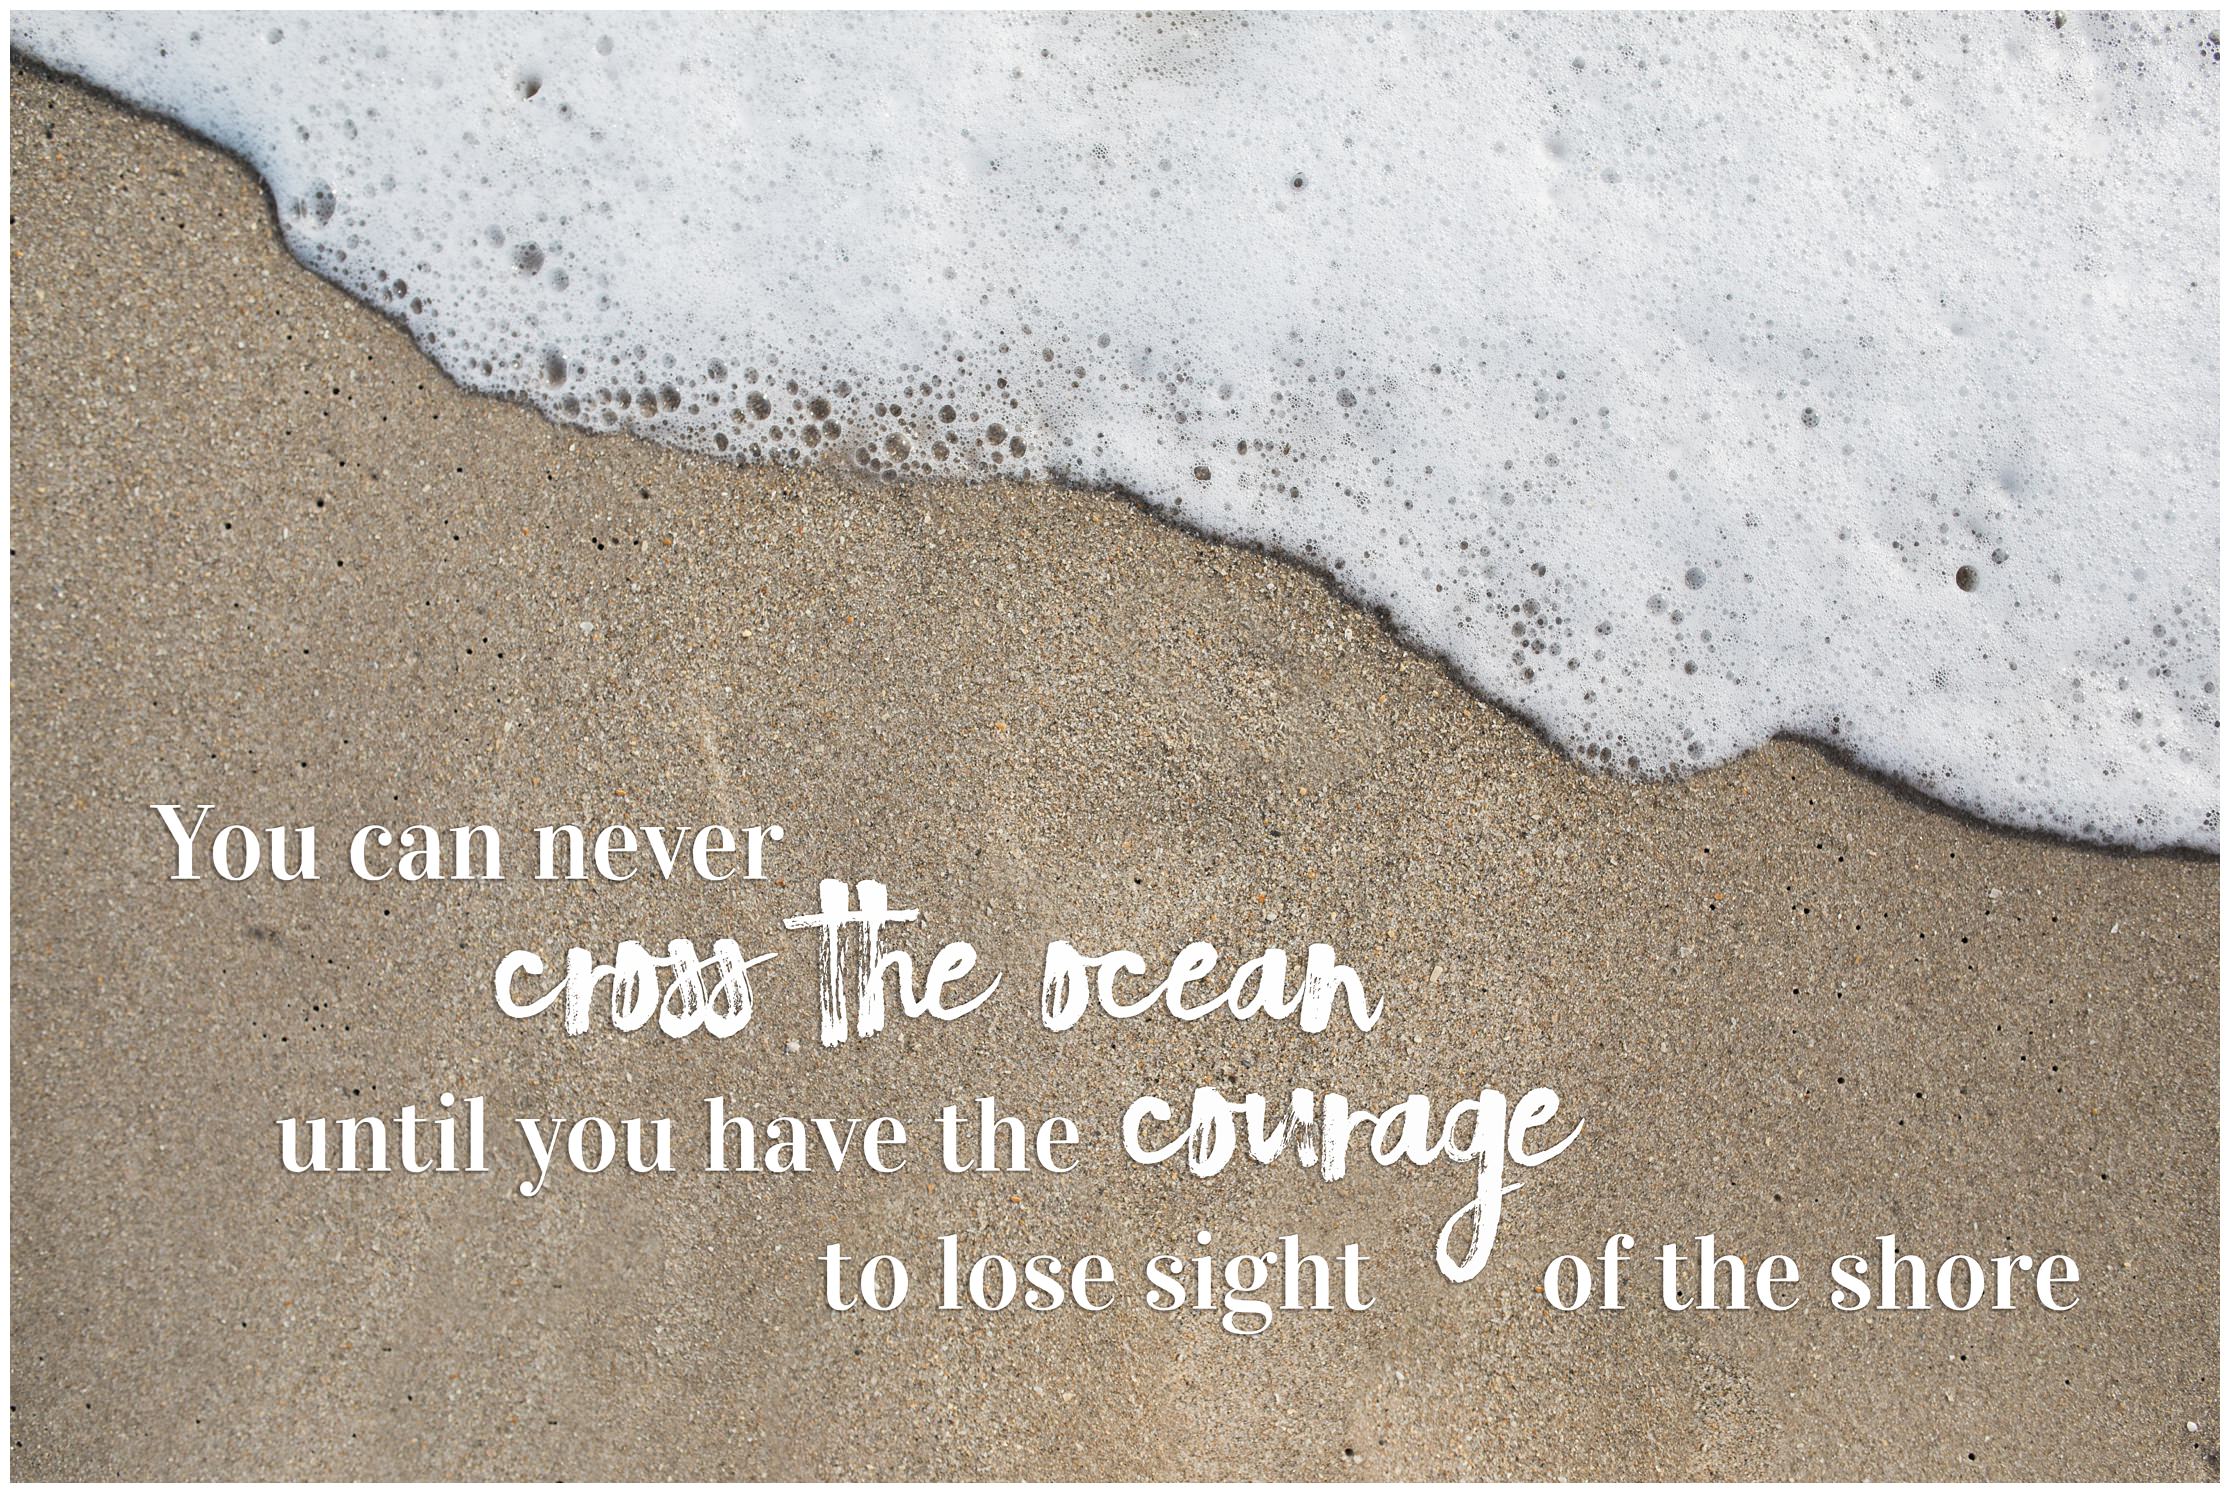 beach, ocean, sea, water, sand, quote, motivational quote, cross the ocean, have the courage, lose sight of the shore, florida beach, florida photographer, florida photography, treasure coast, follow your dreams